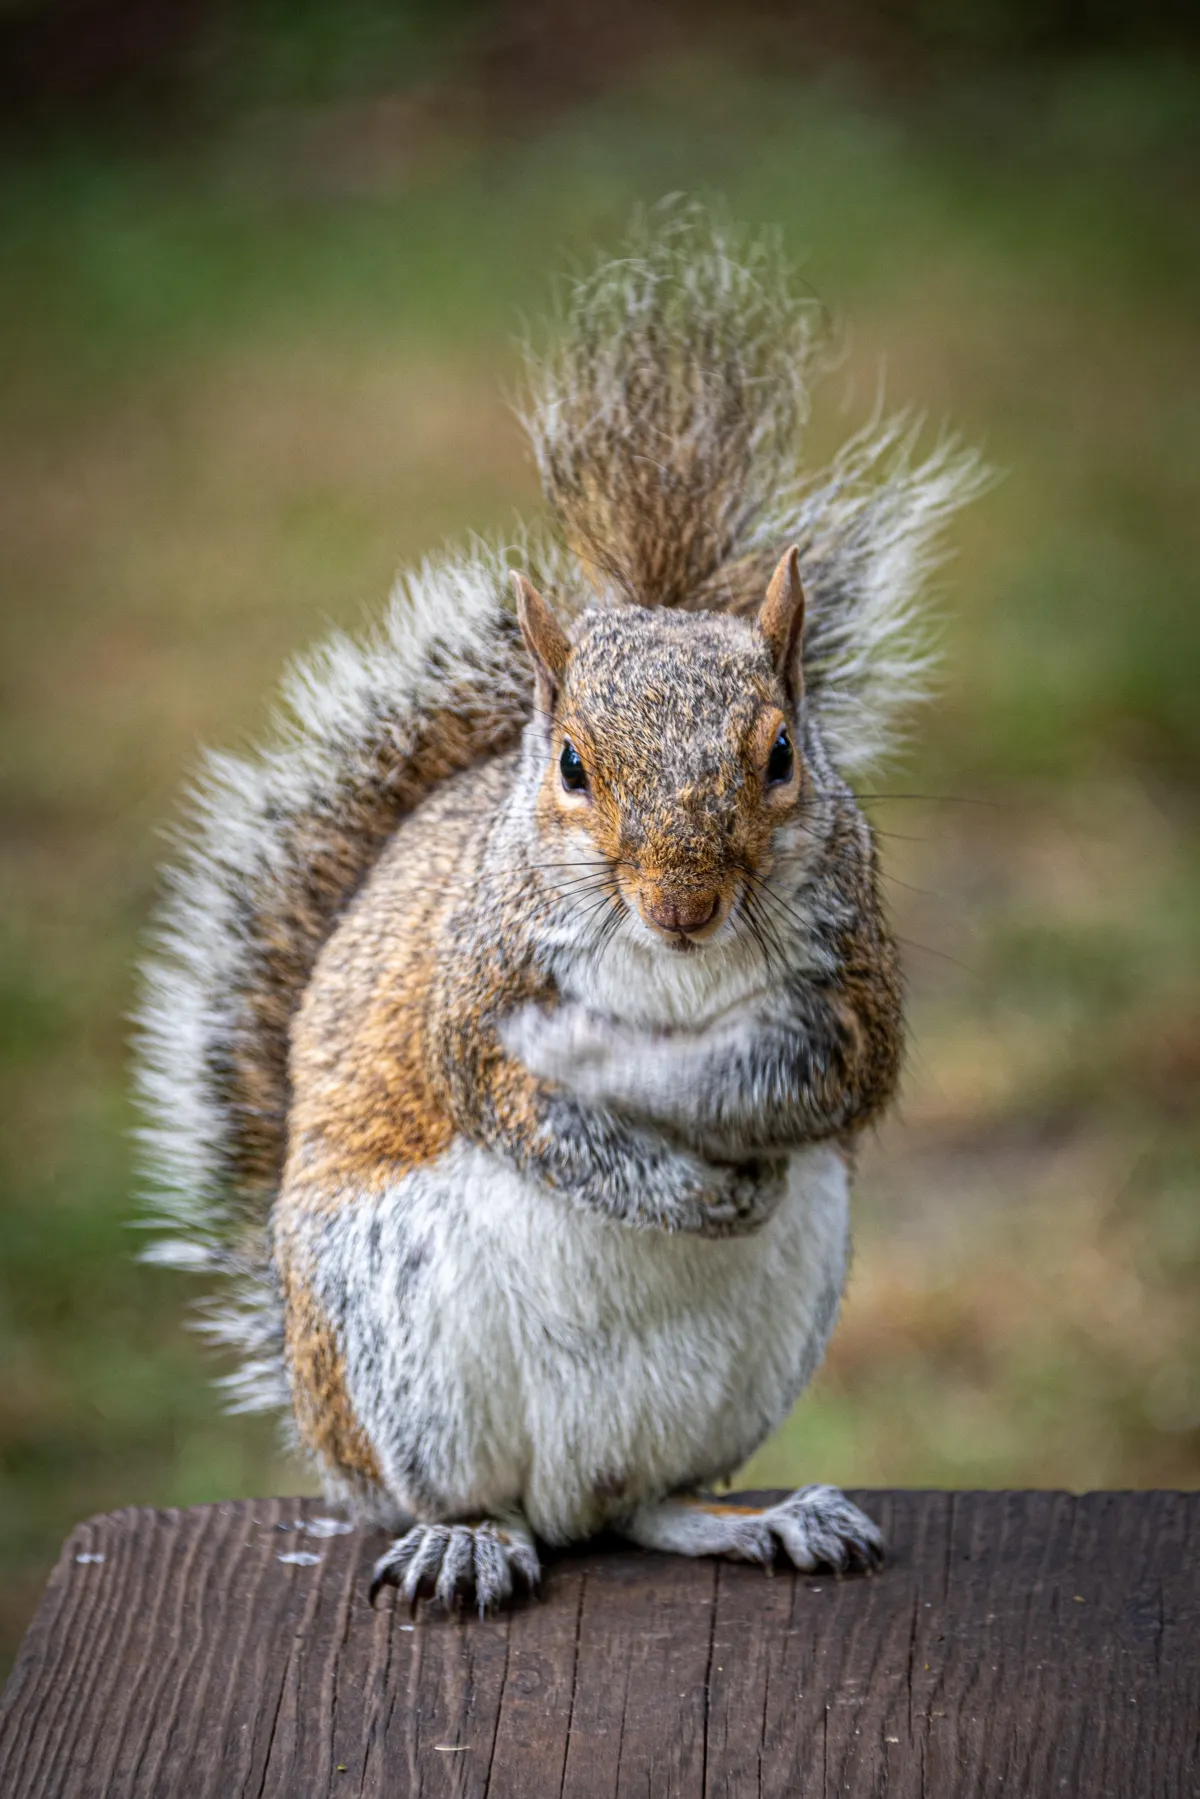 a close up photograph of a squirrel